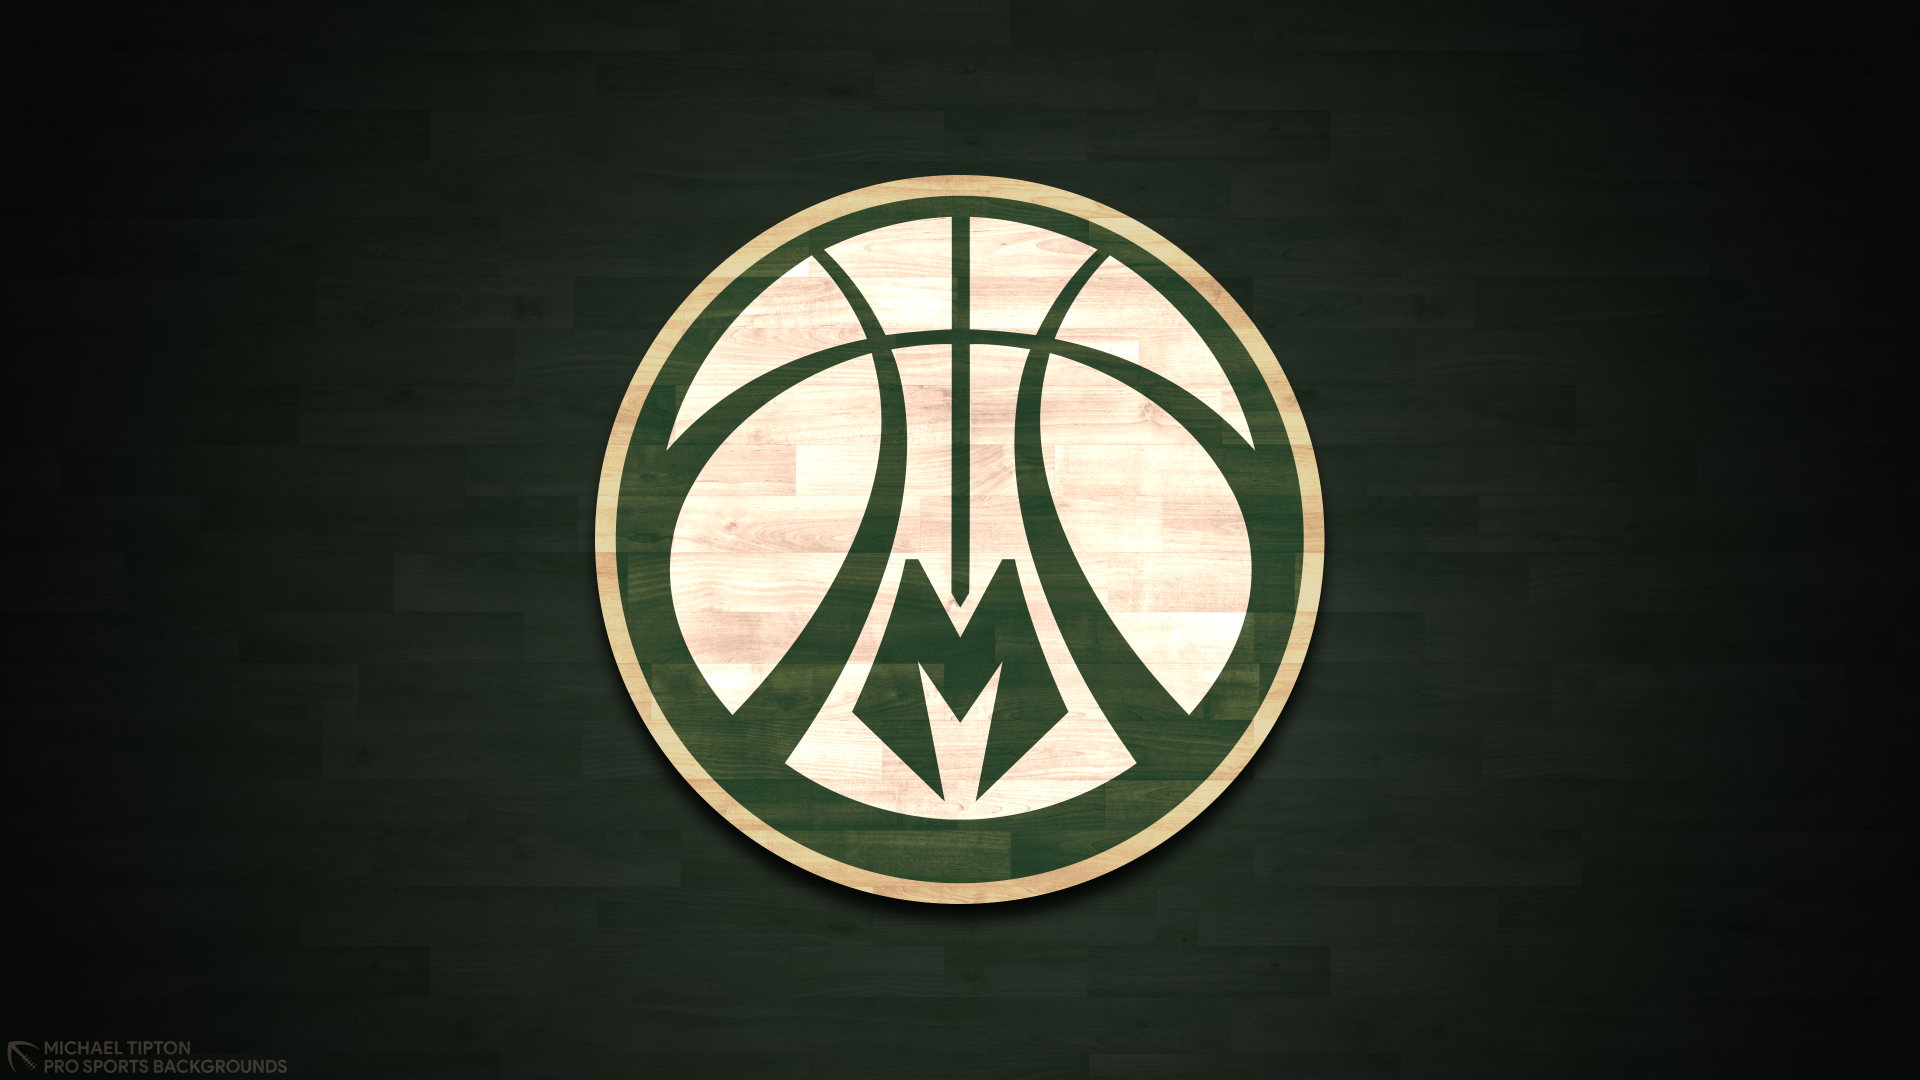 Ferry on Twitter Bucks Wallpaper just in time for the playoffs  FearTheDeer httpstcozFRFAb3f1x  X